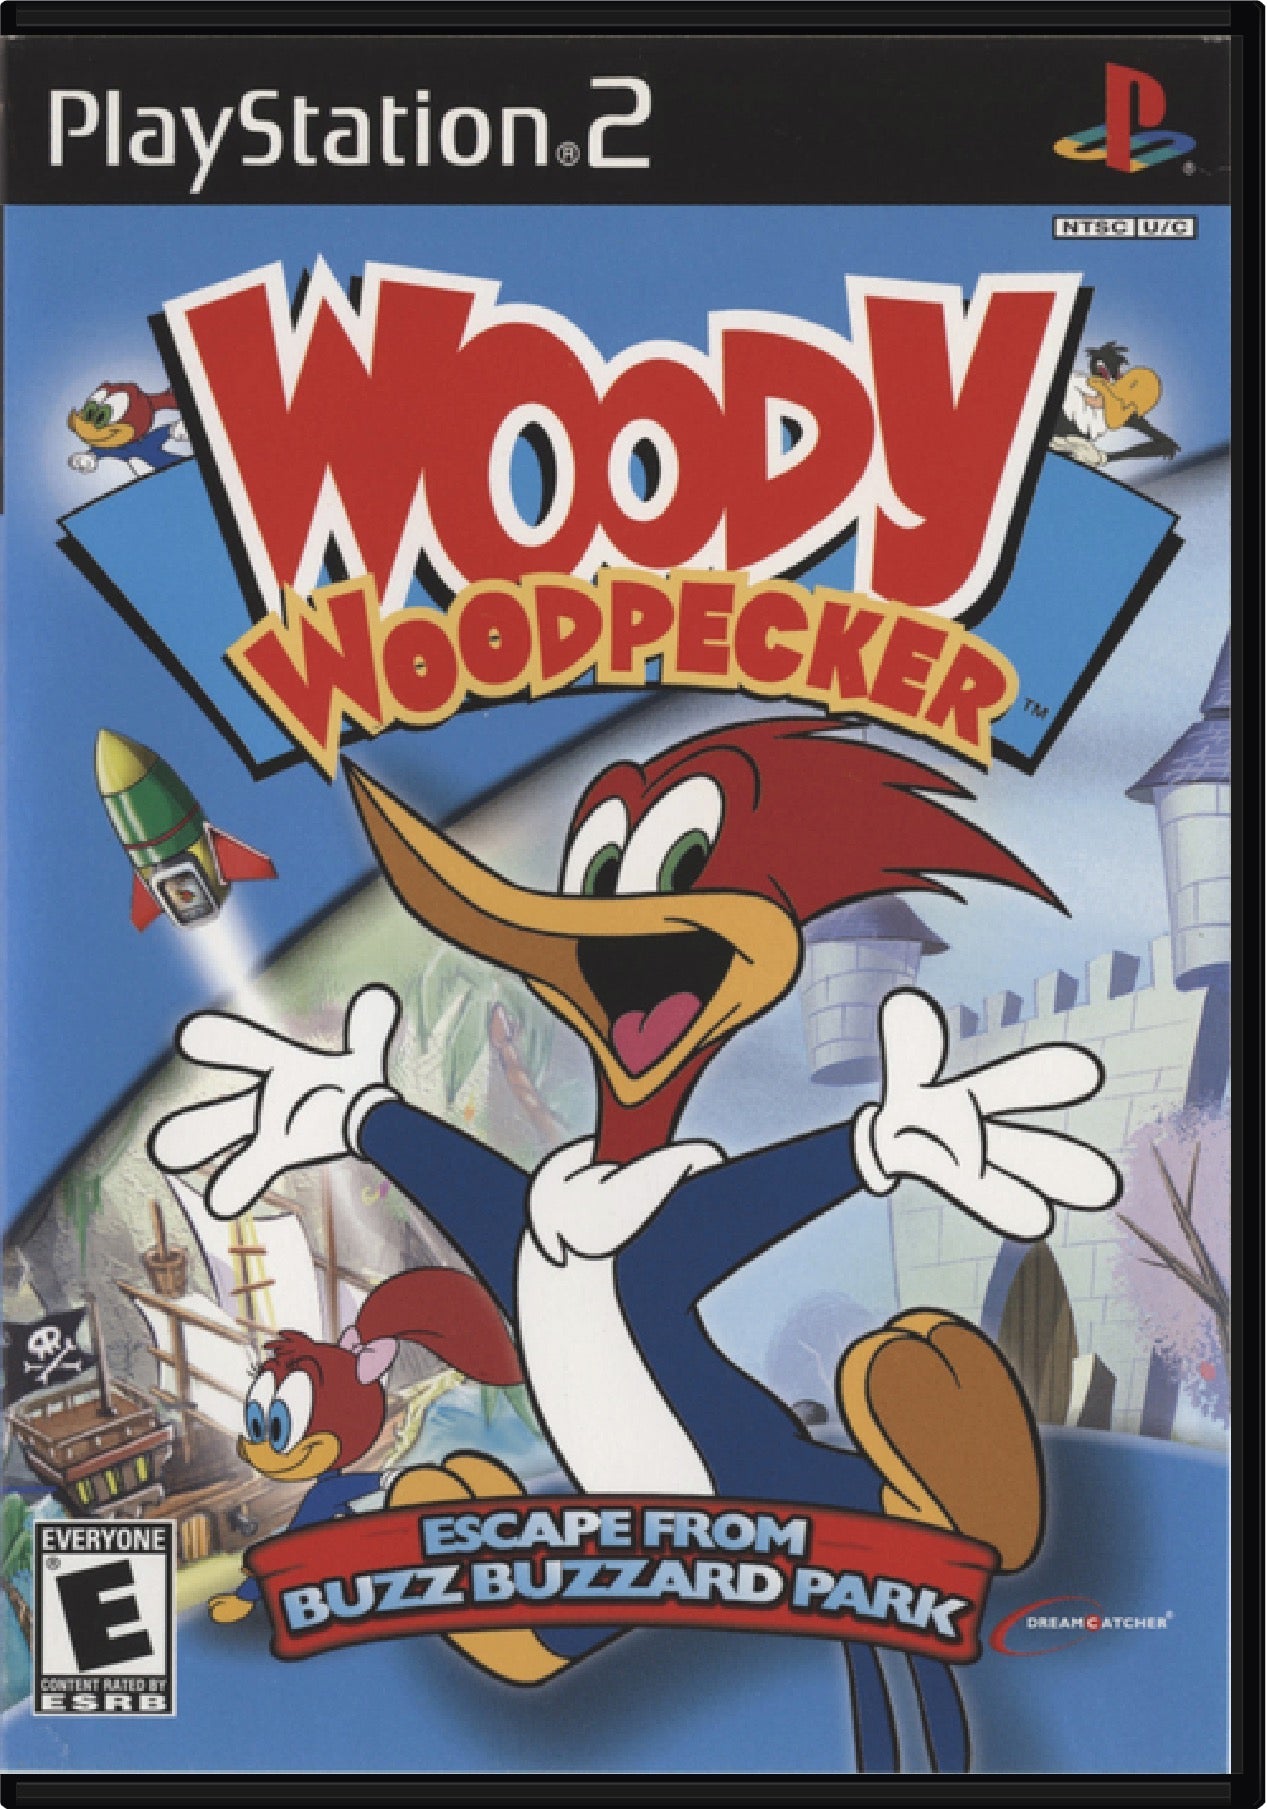 Woody Woodpecker Escape From Buzz Buzzard Park Cover Art and Product Photo